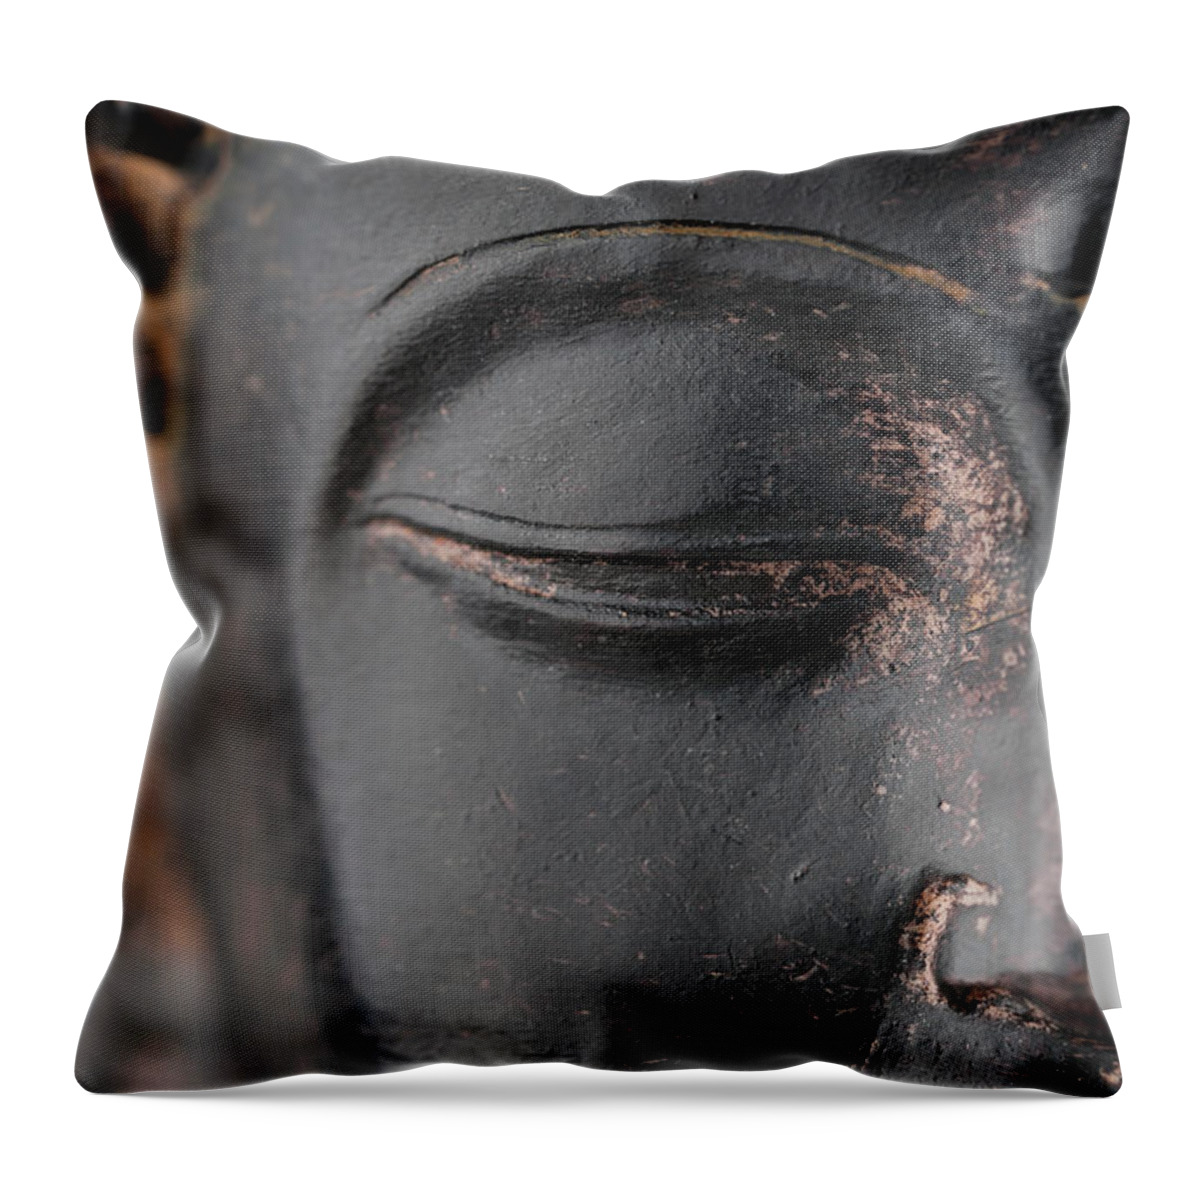 Statue Throw Pillow featuring the photograph Closeup Of Black Stone Buddha Face by Wesvandinter